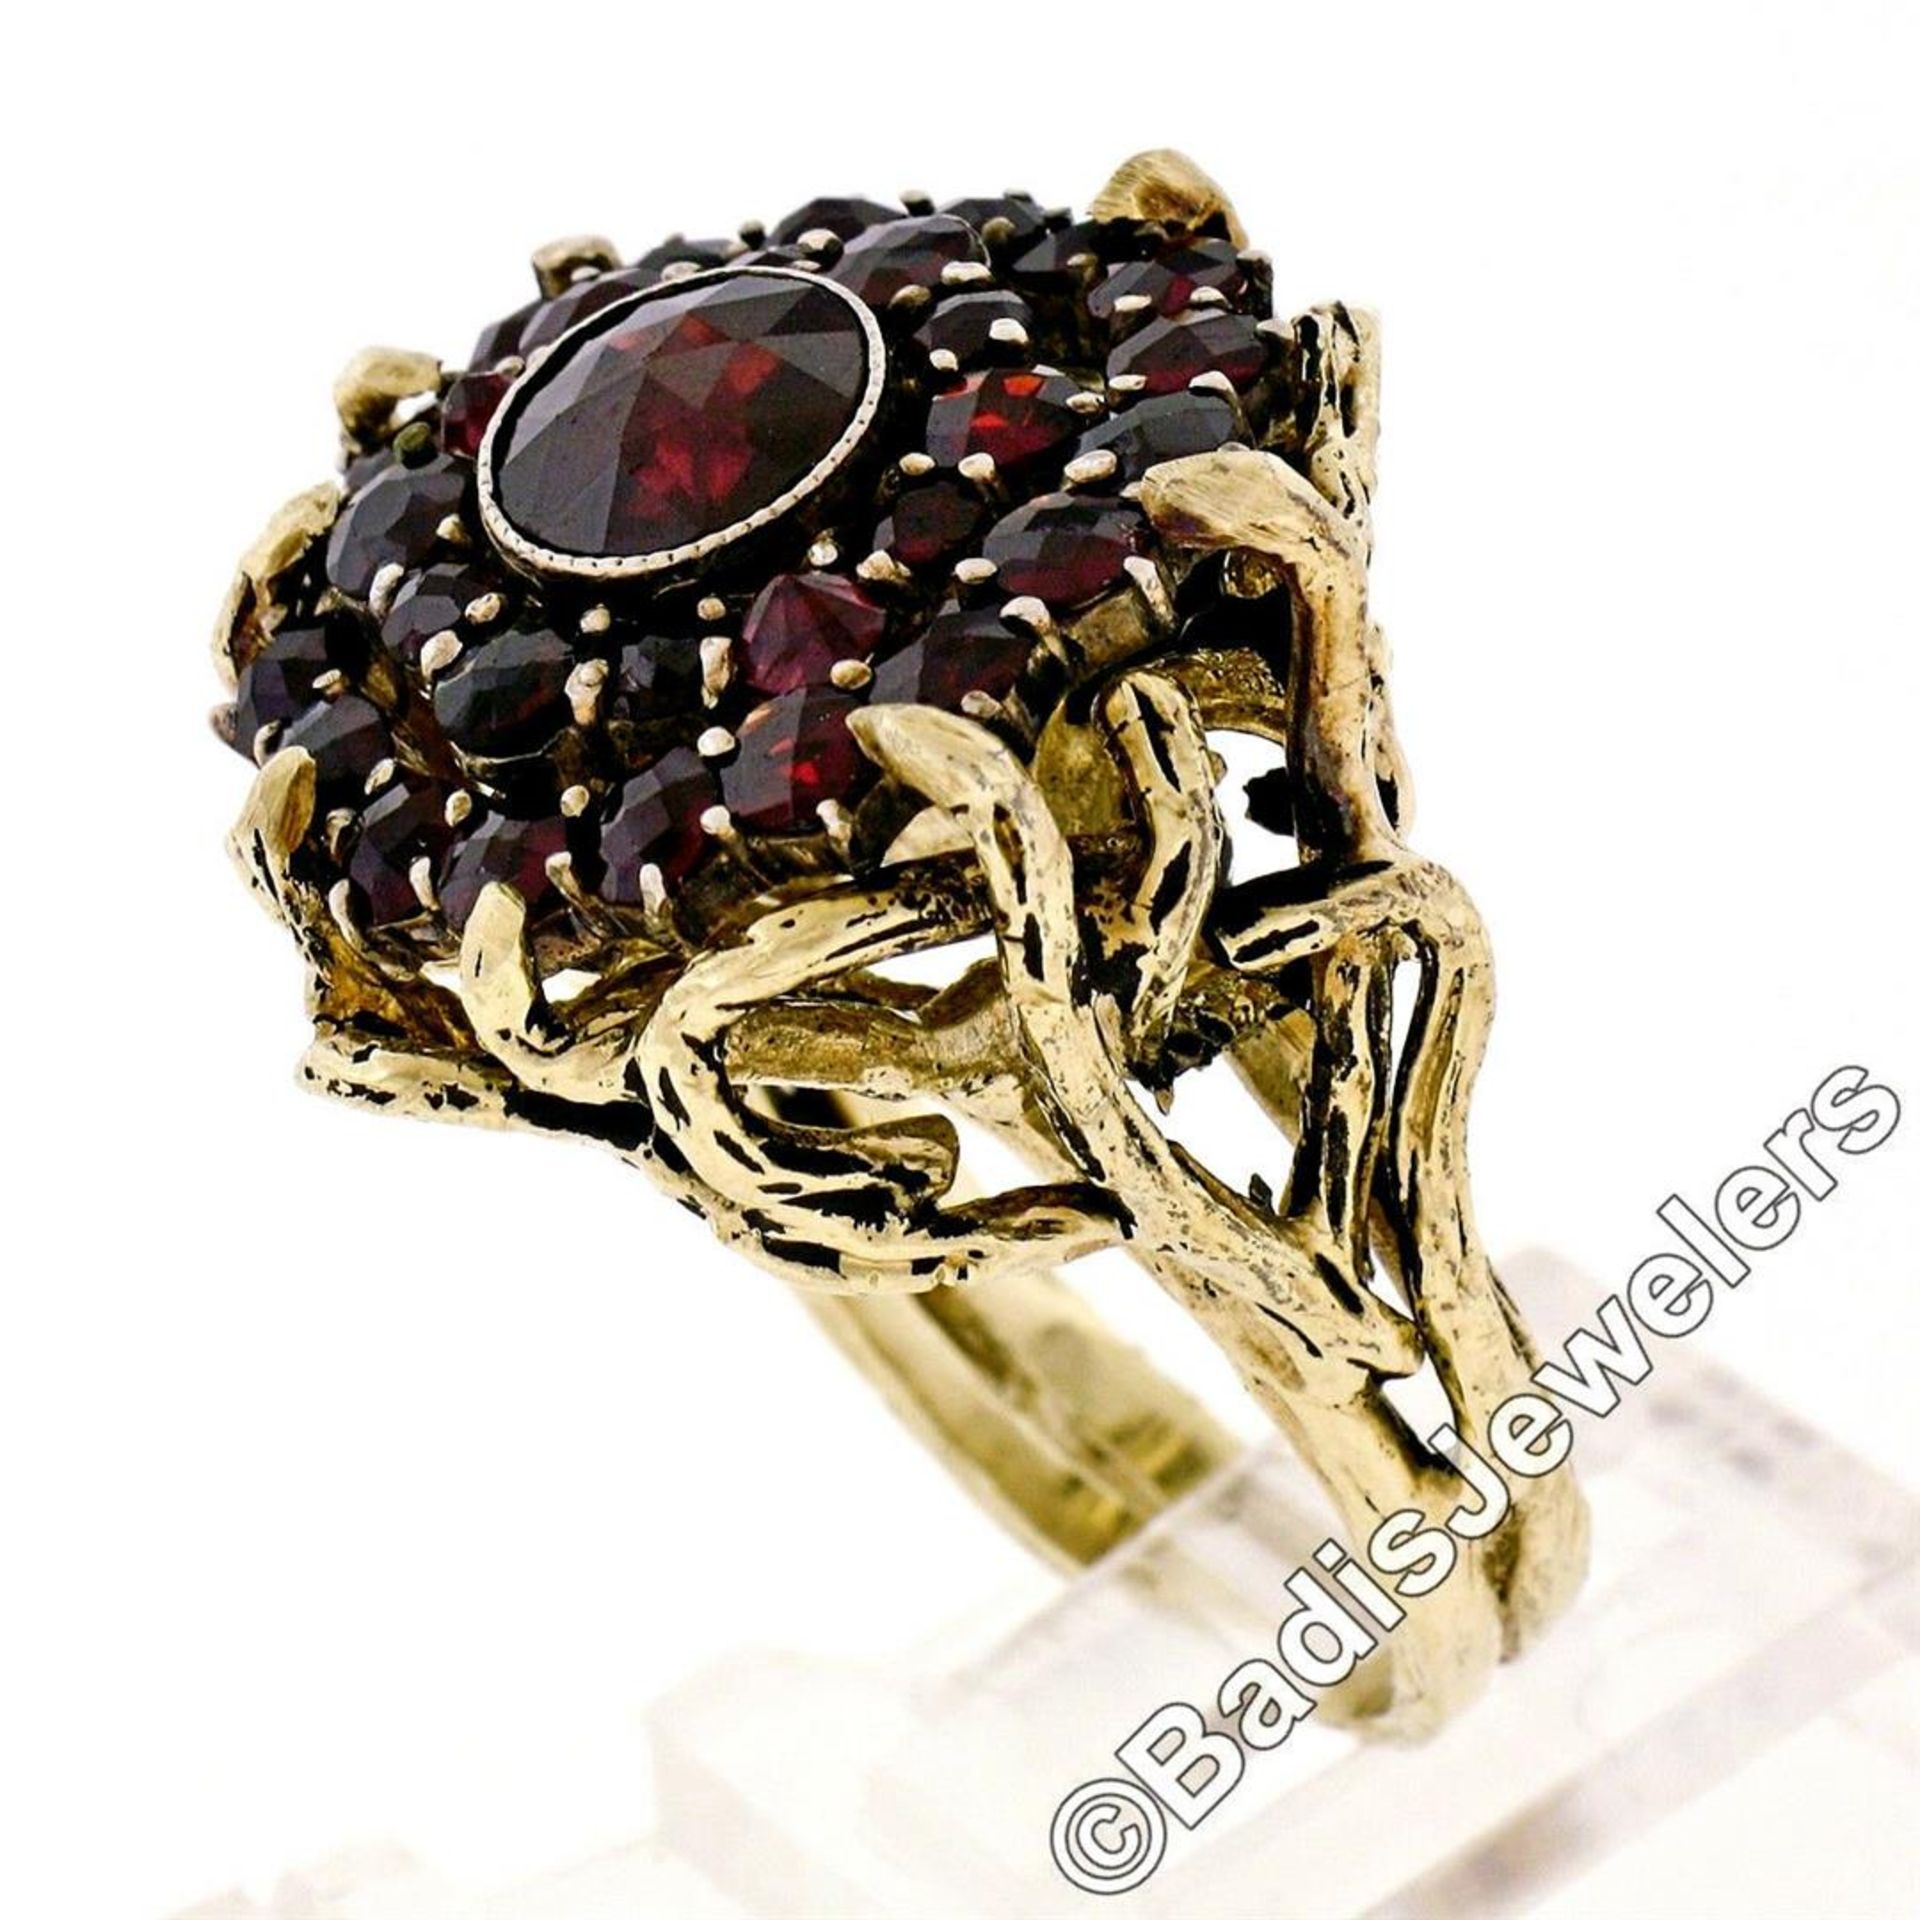 Vintage 14kt Yellow Gold and Silver Top Old Cut Garnet Cluster Ring - Image 6 of 9